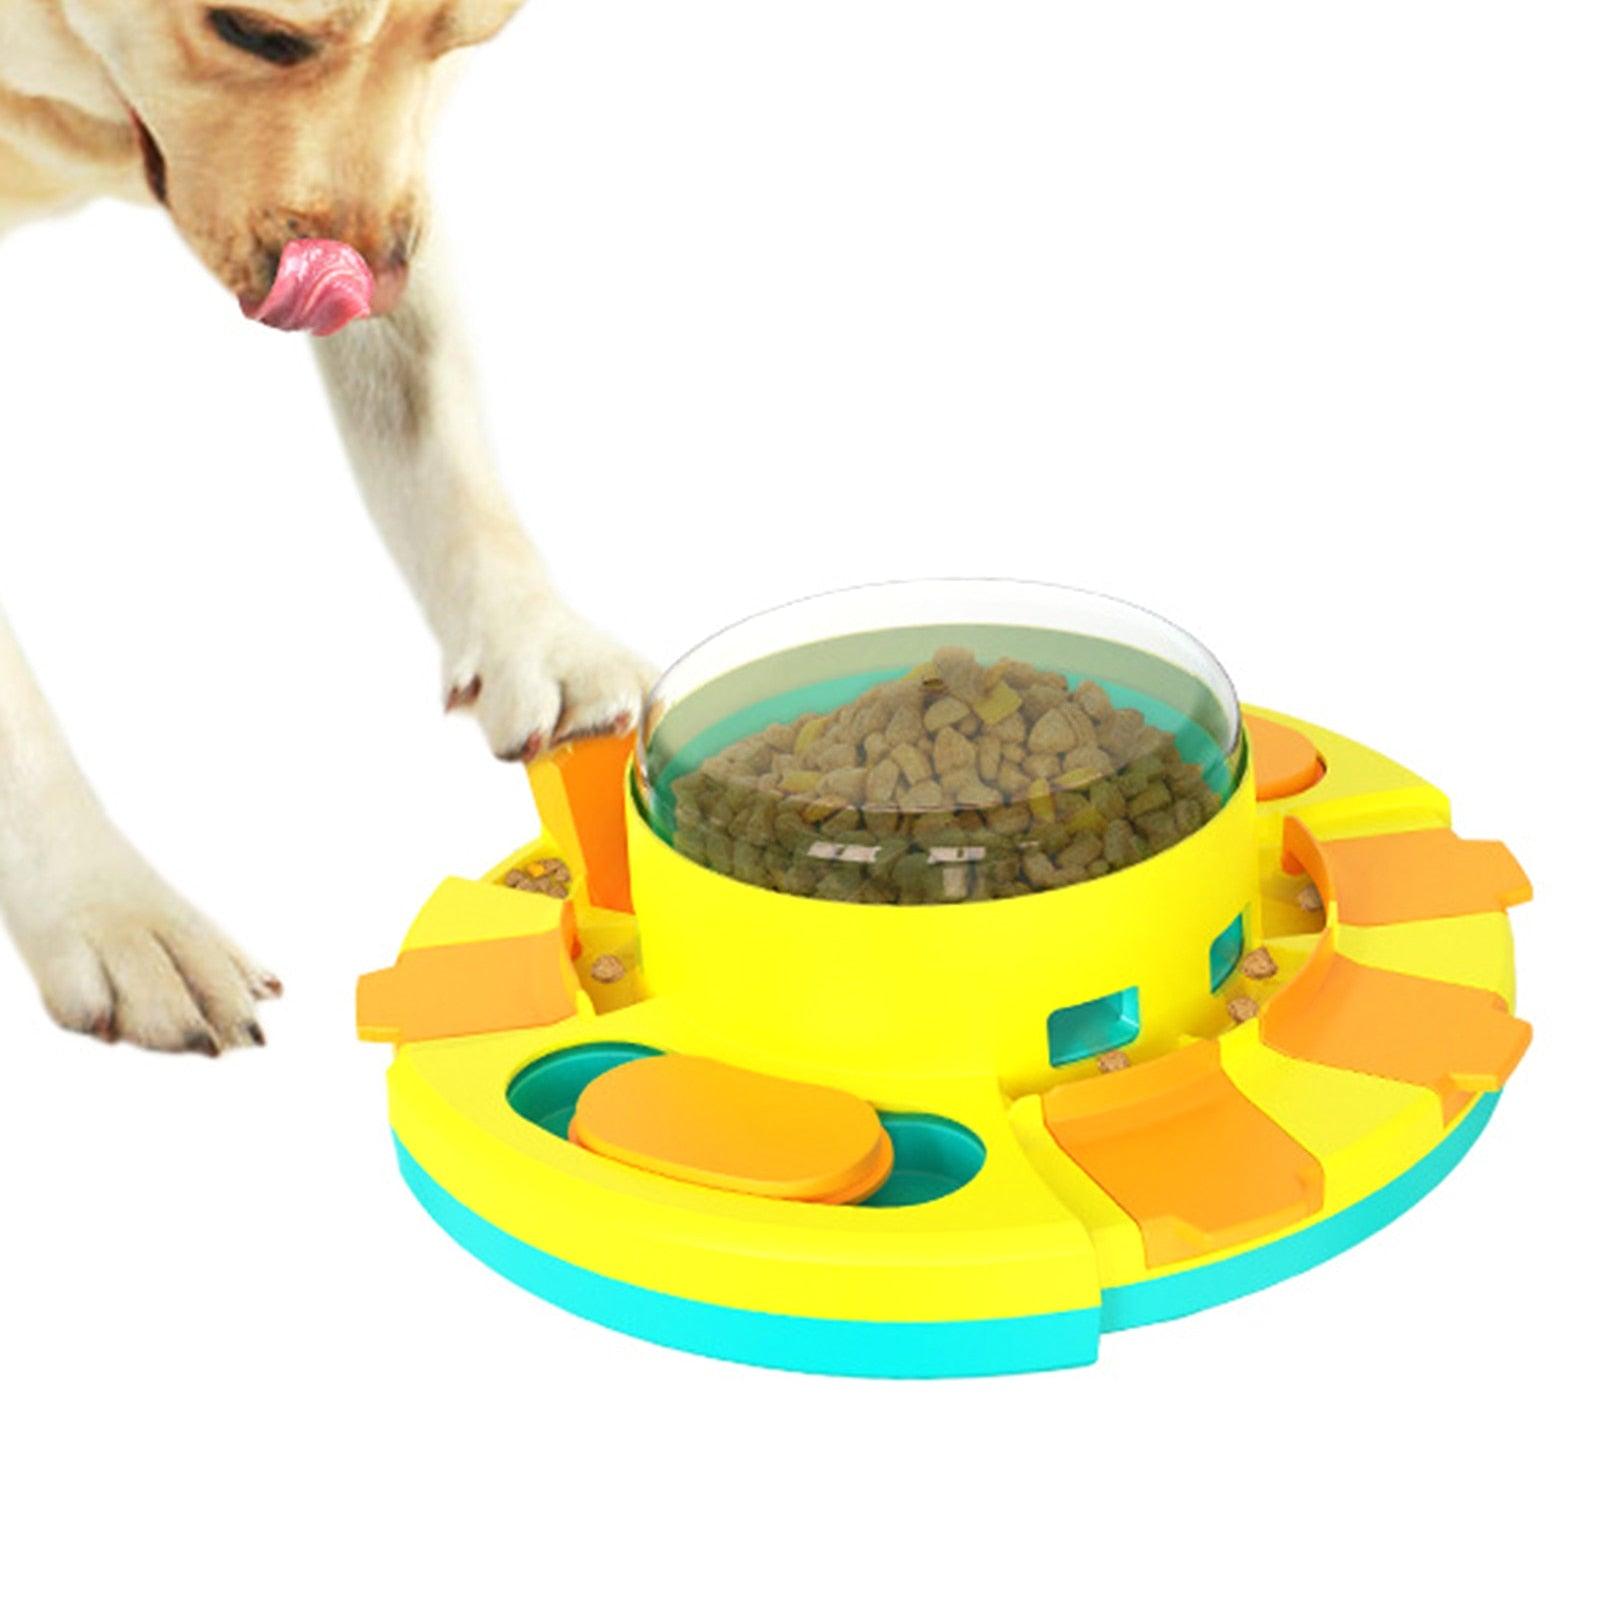 PamperedPups - Anxiety & Boredom Reducing Interactive Slow Feeder Dog Toy Green